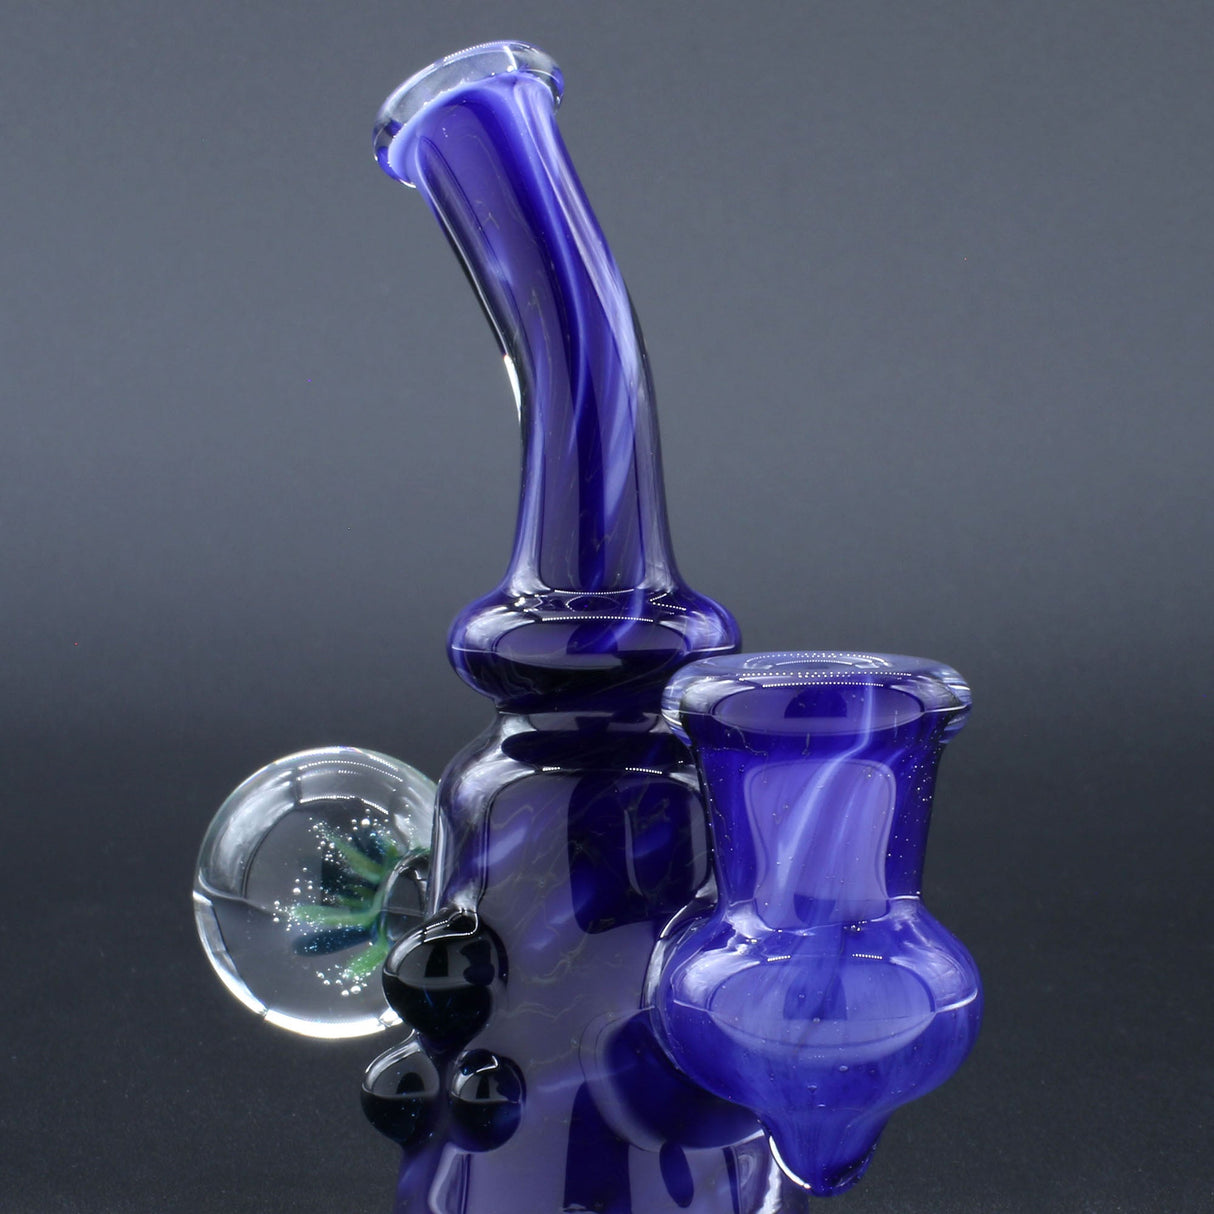 Clayball Glass "Blue Moon" Heady Sherlock Dab Rig with intricate design, front view on dark background